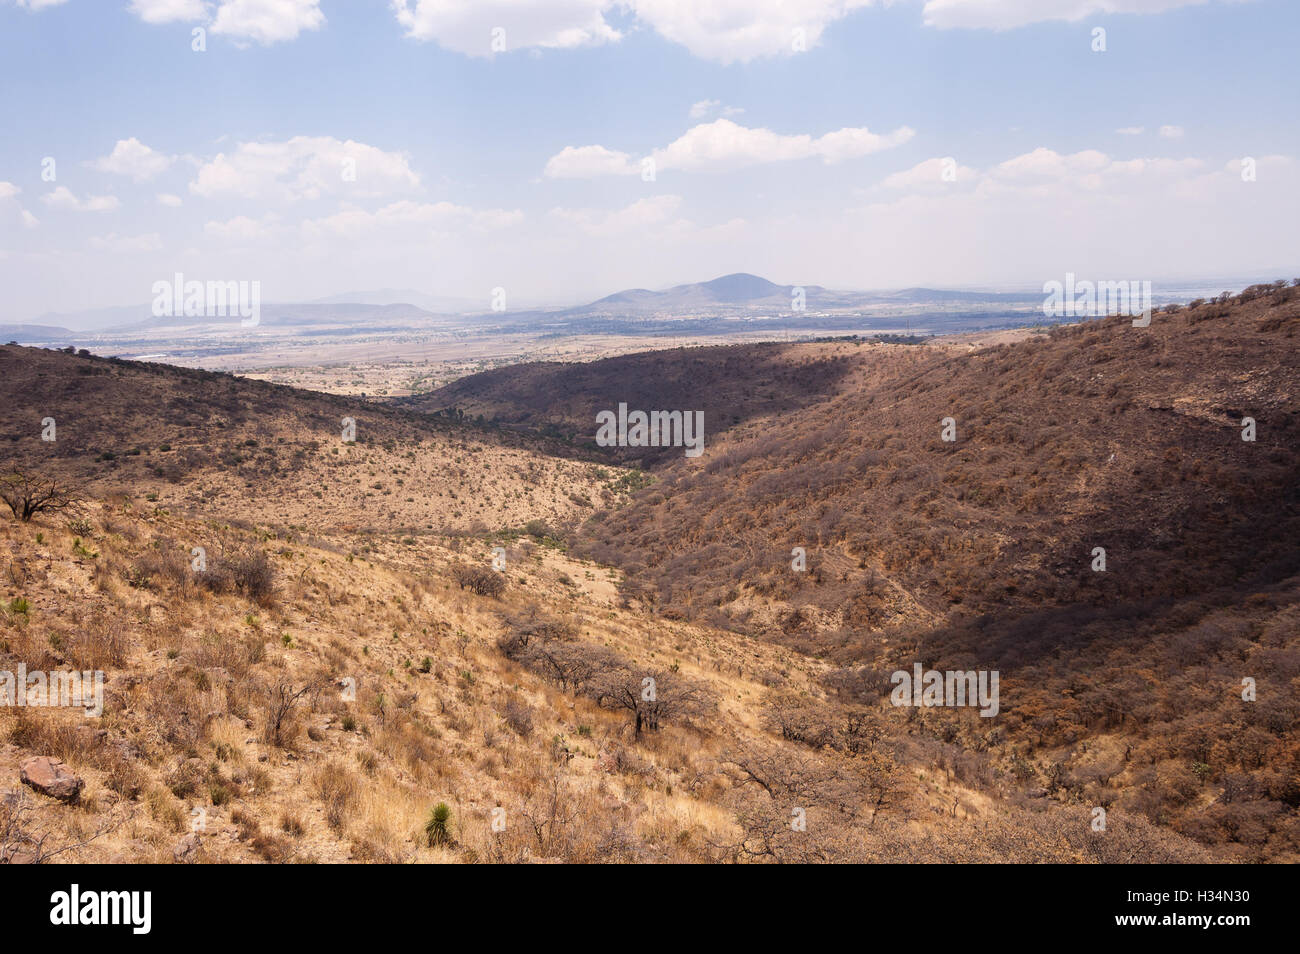 Hills in central Mexico during the dry season Stock Photo